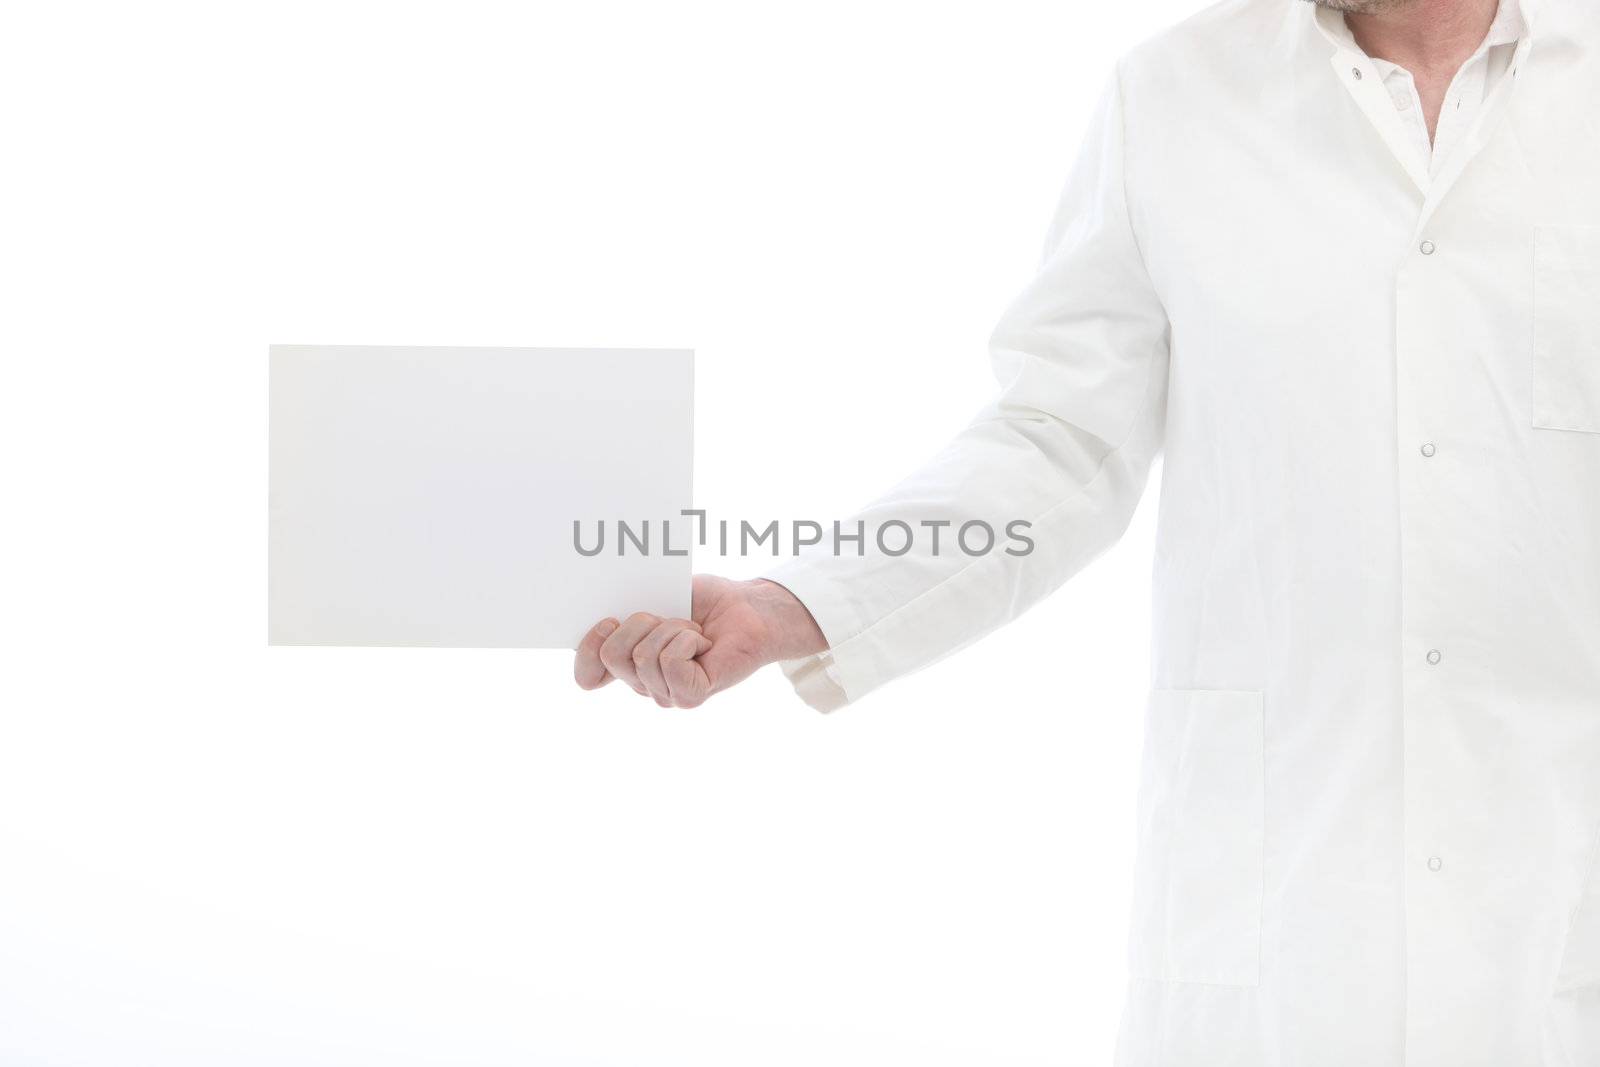 Lab worker holding a small poster in his hand by Farina6000